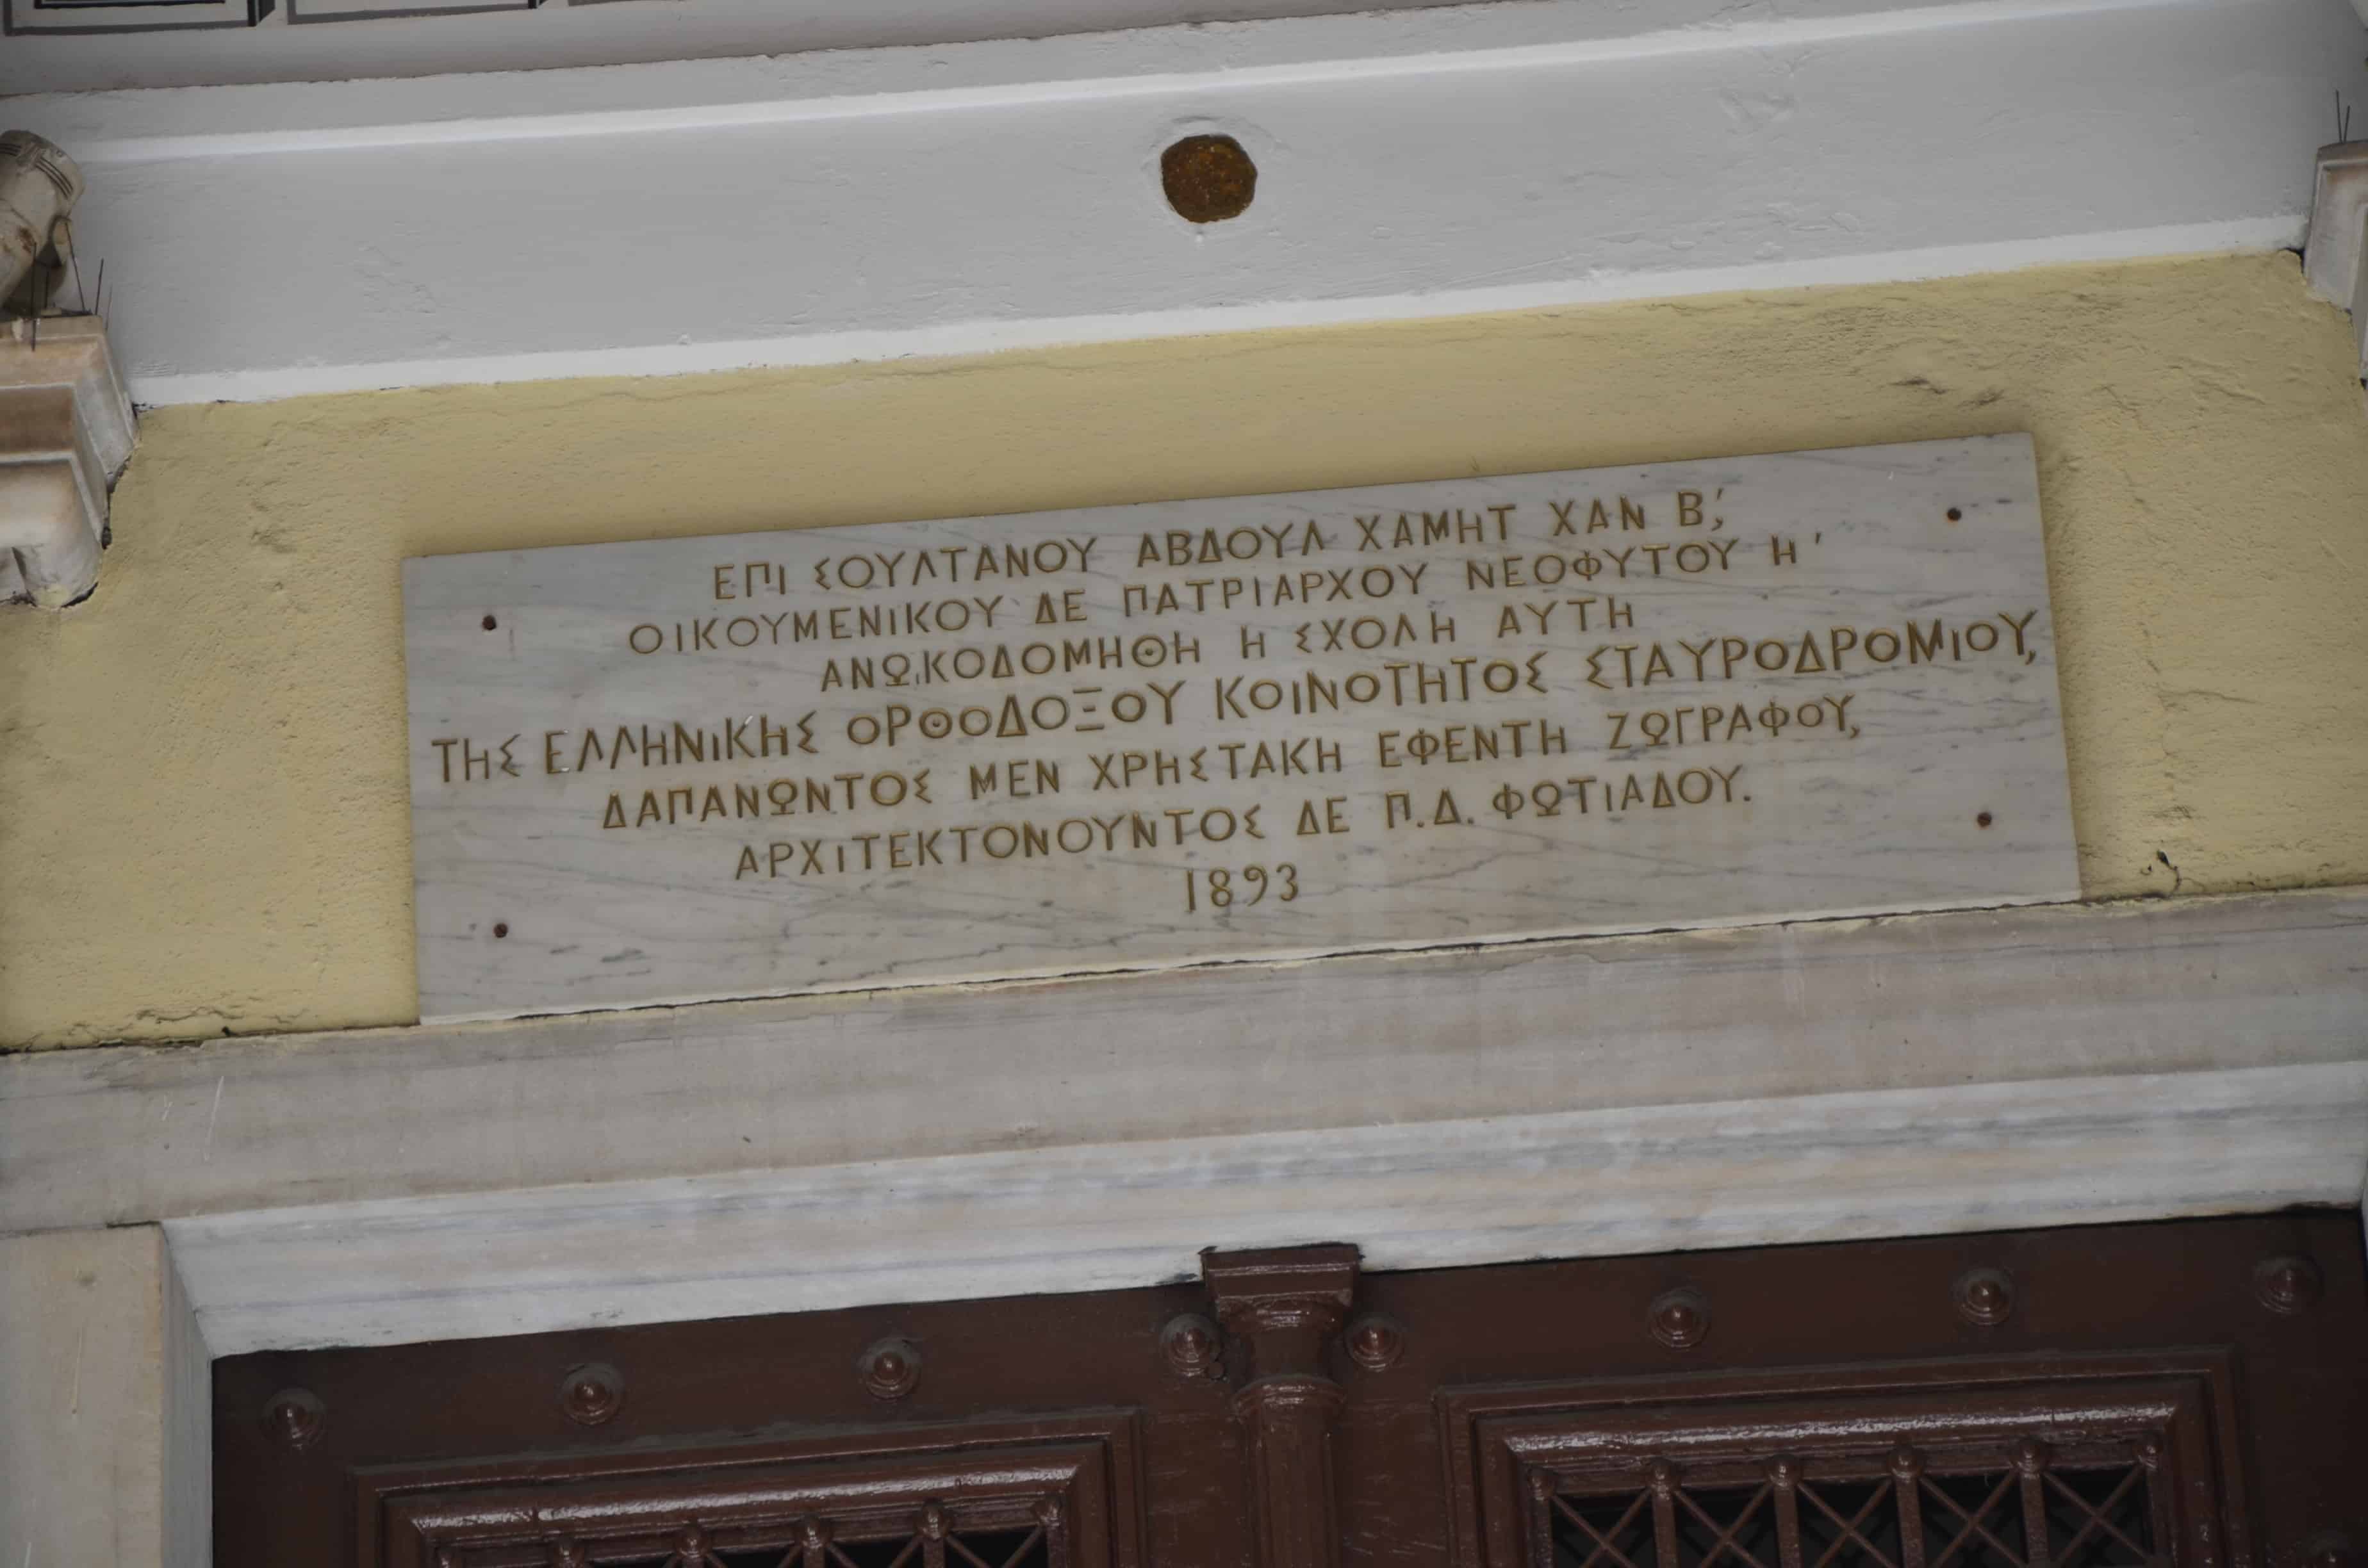 Dedication plaque in Greek on the Zografeion Lyceum